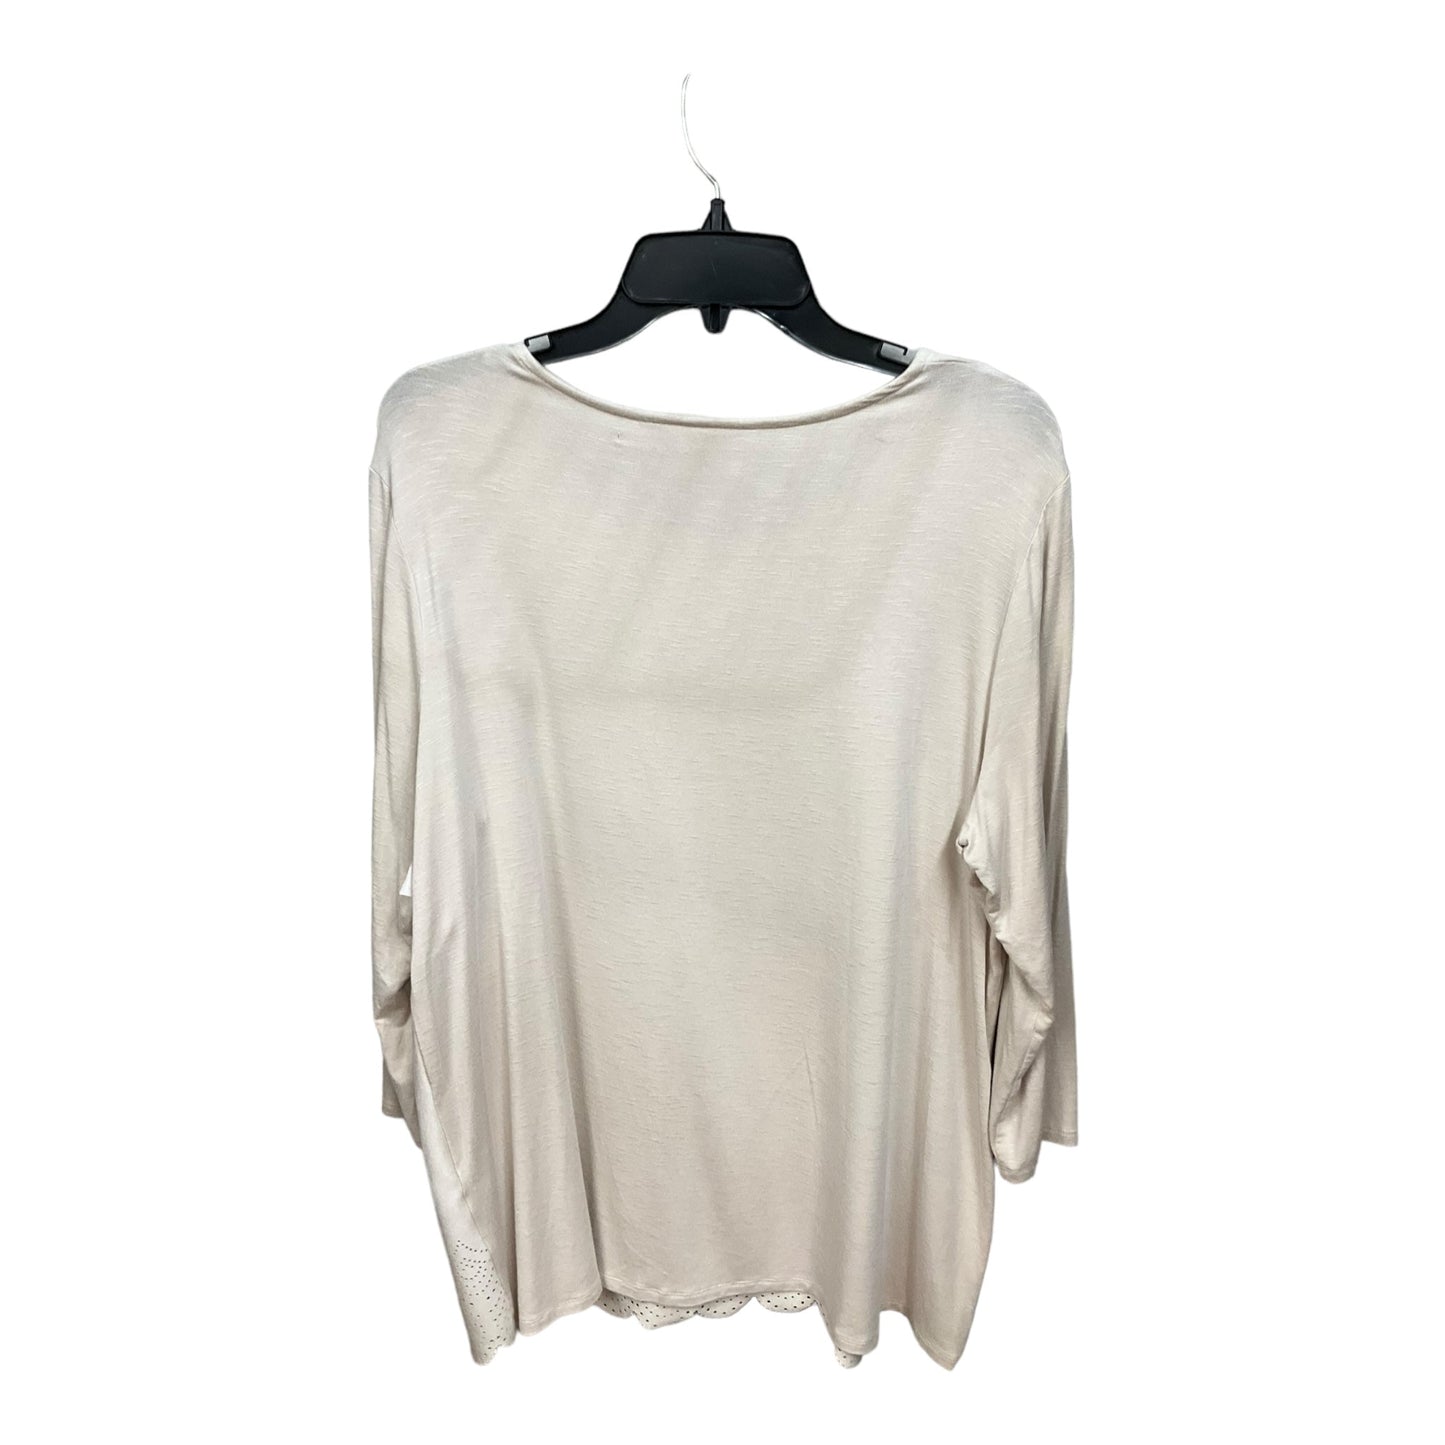 Tan Top Long Sleeve Chicos, Size L